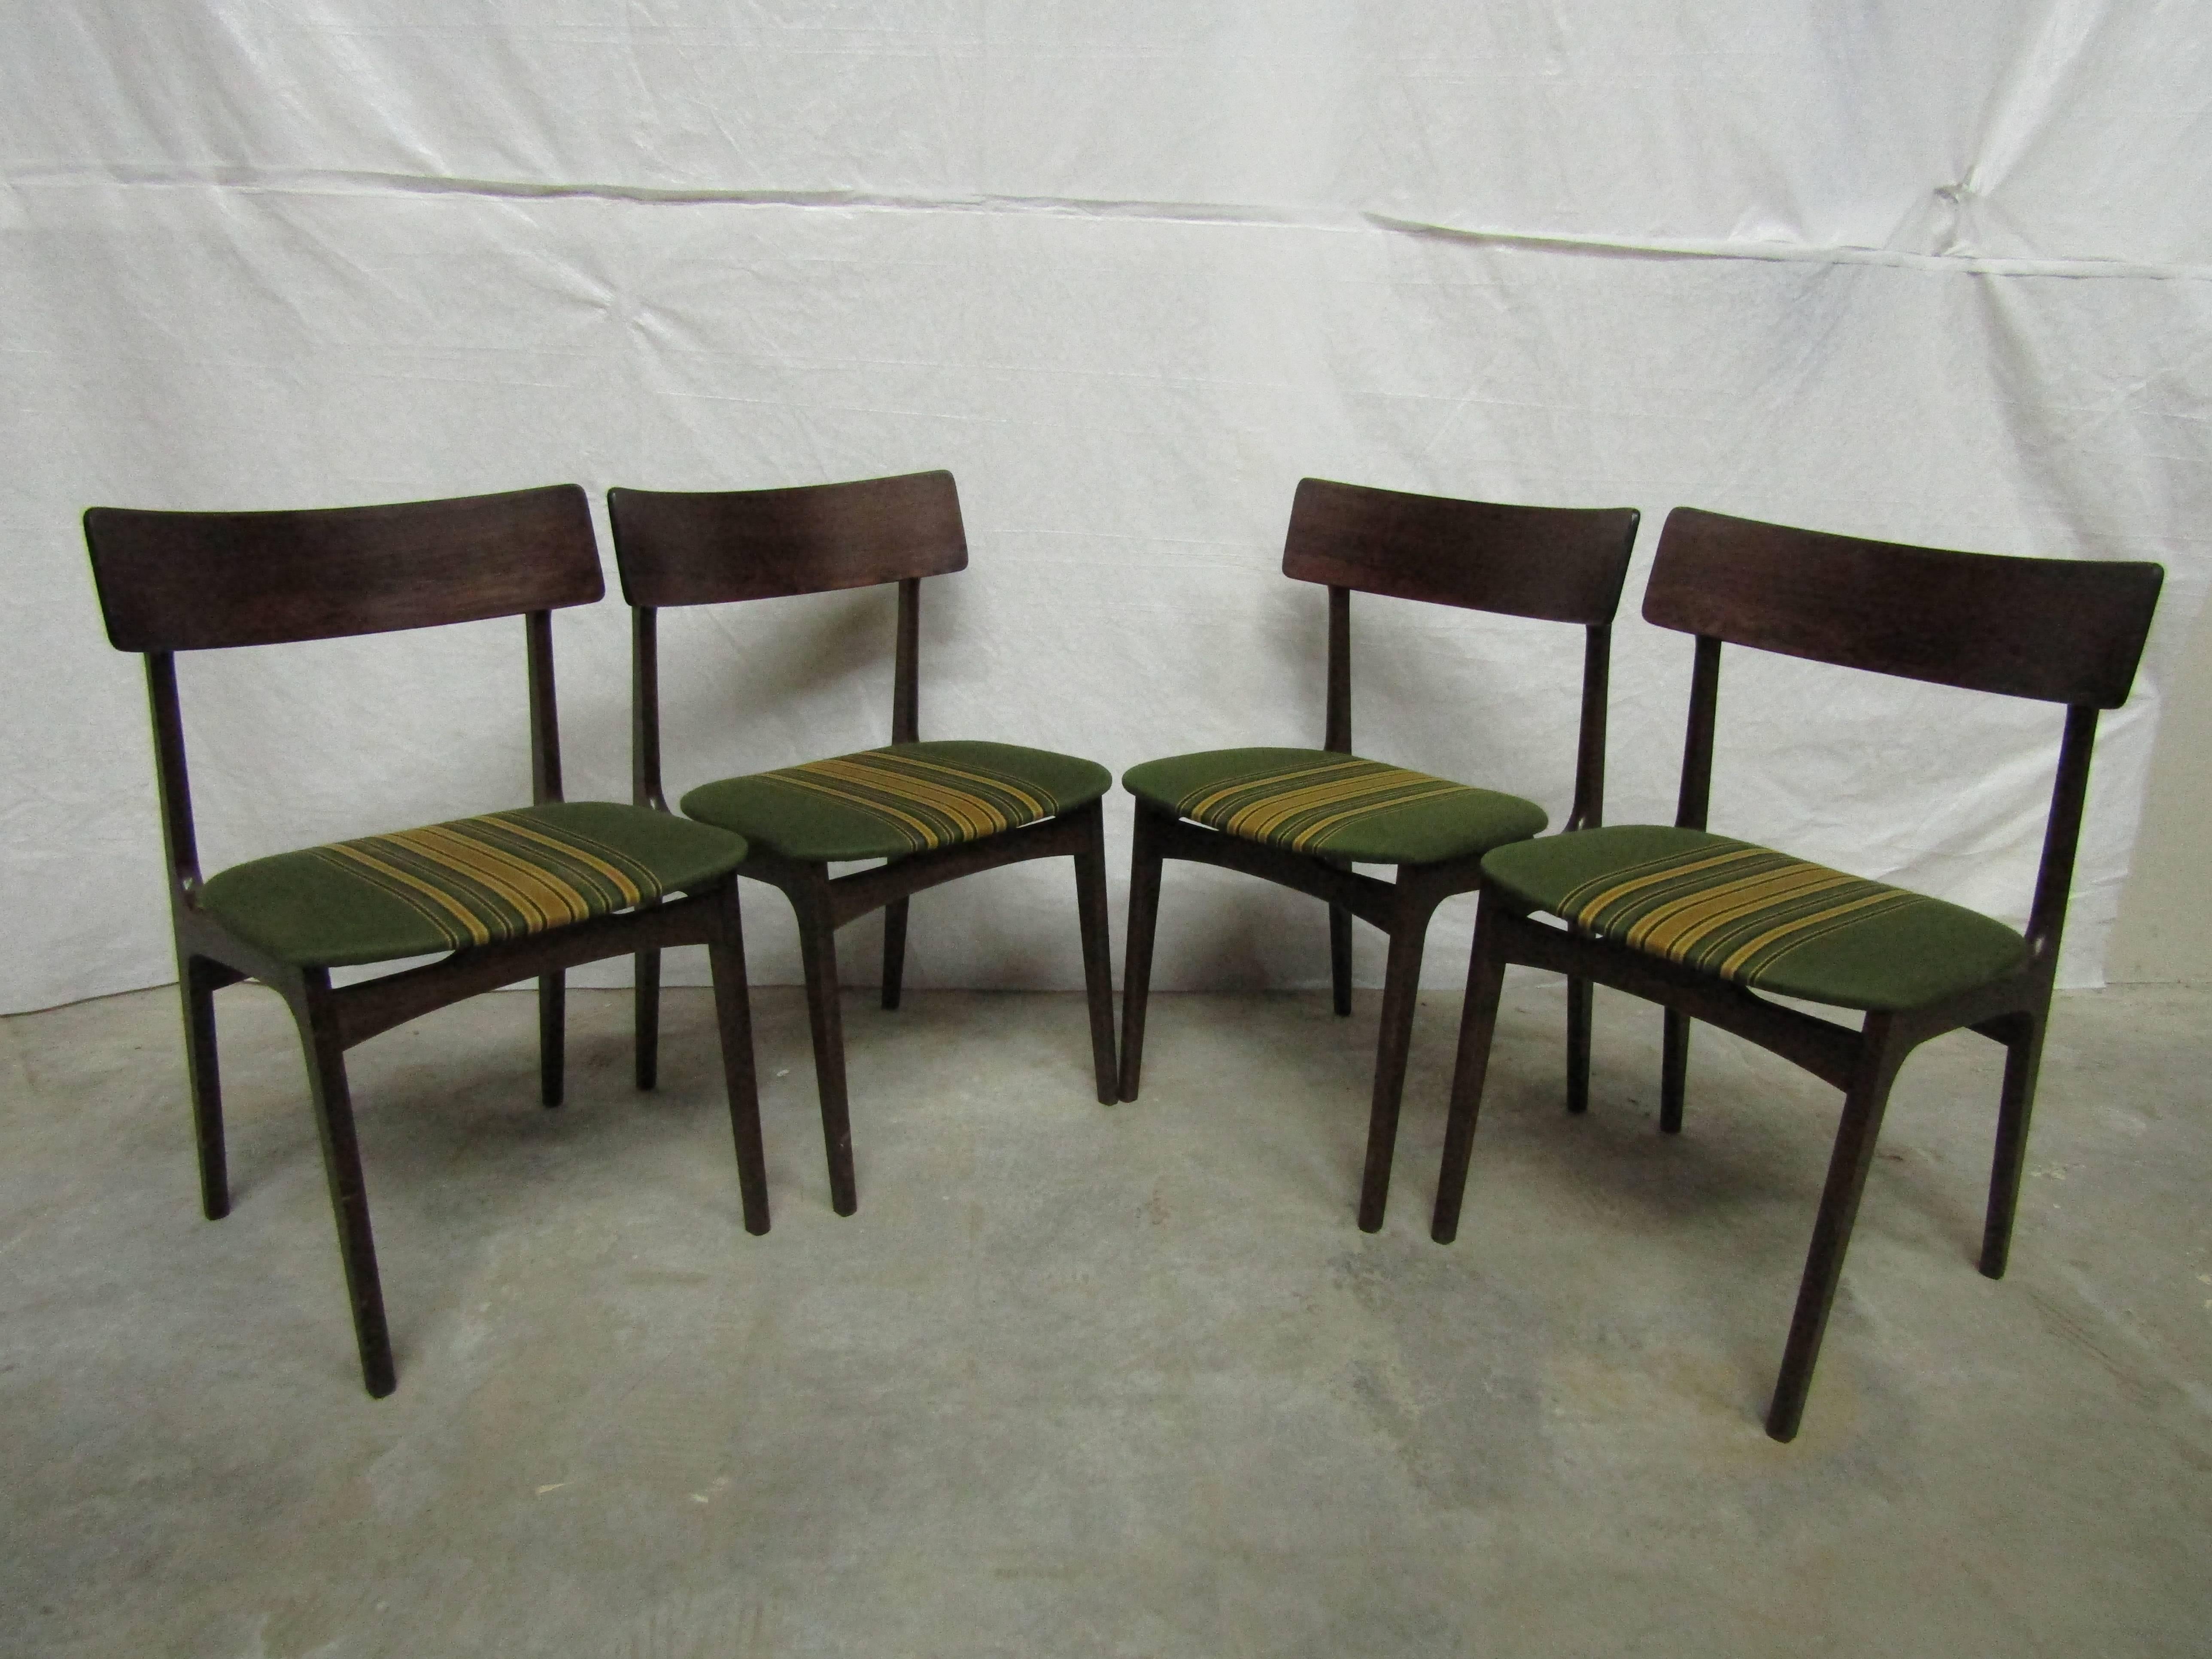 Set of four solid rosewood dining chairs with original upholstery made in Denmark.